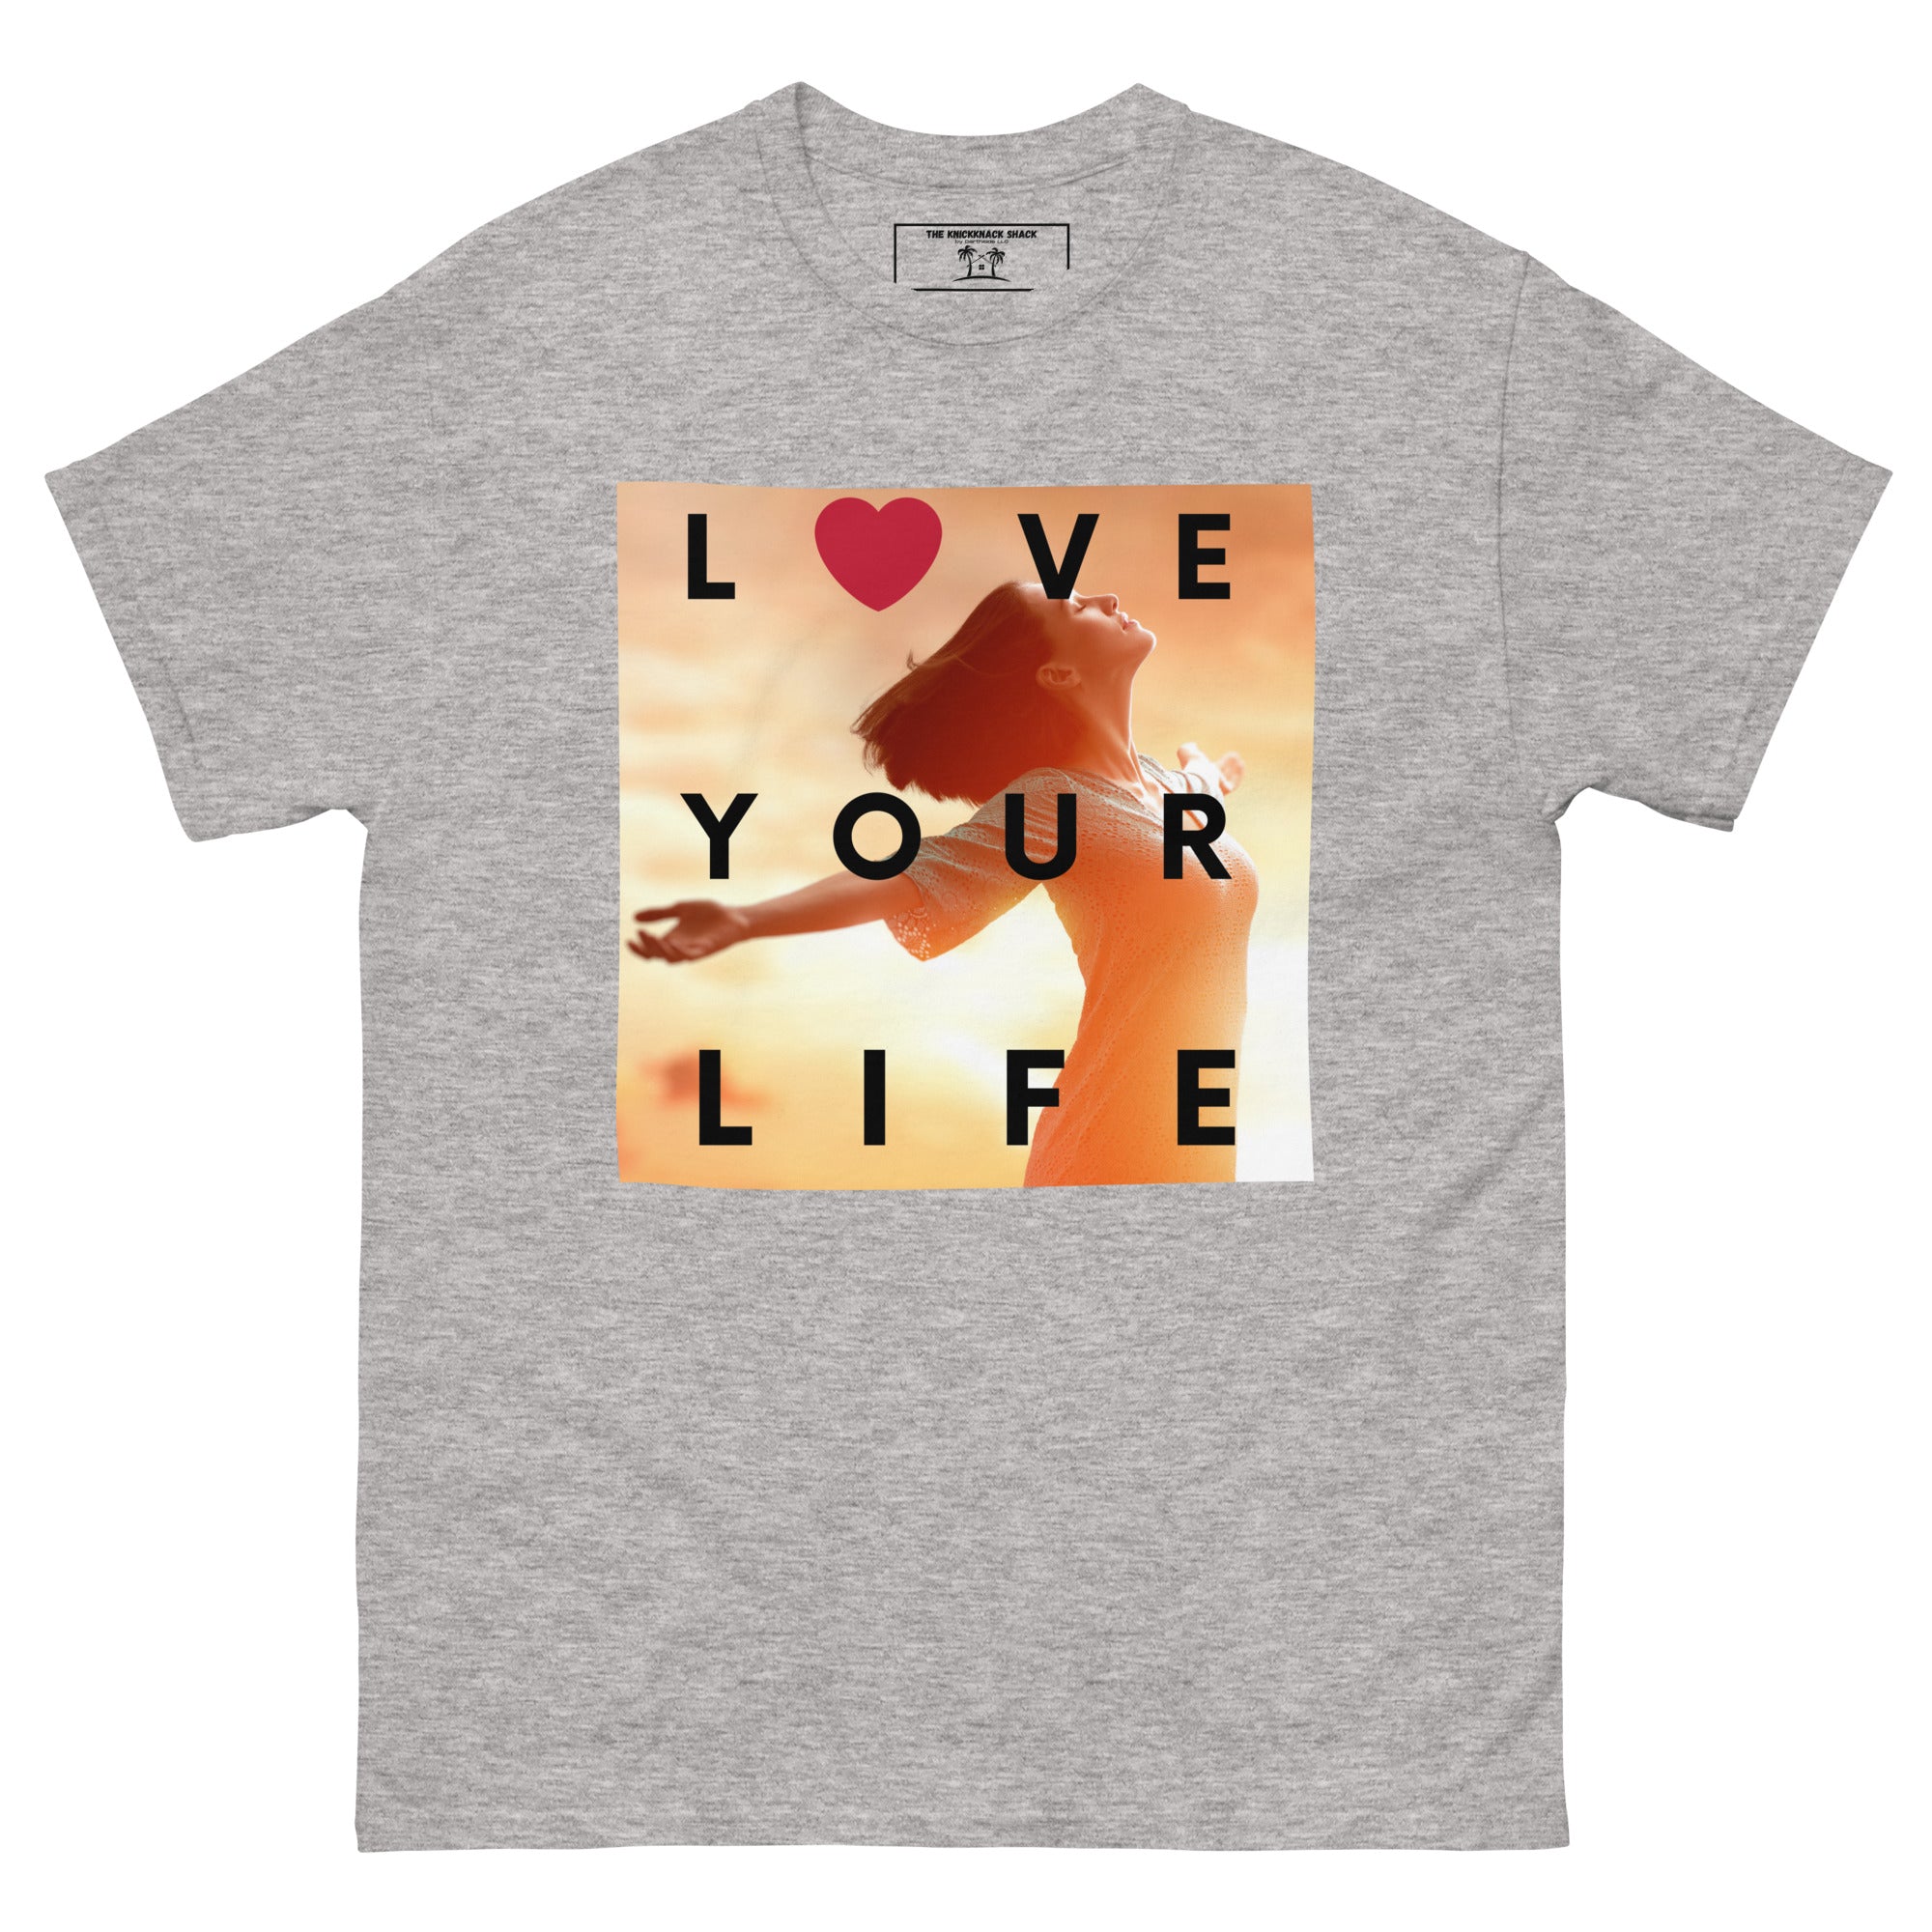 Classic Tee - Love Your Life (Light Colors)